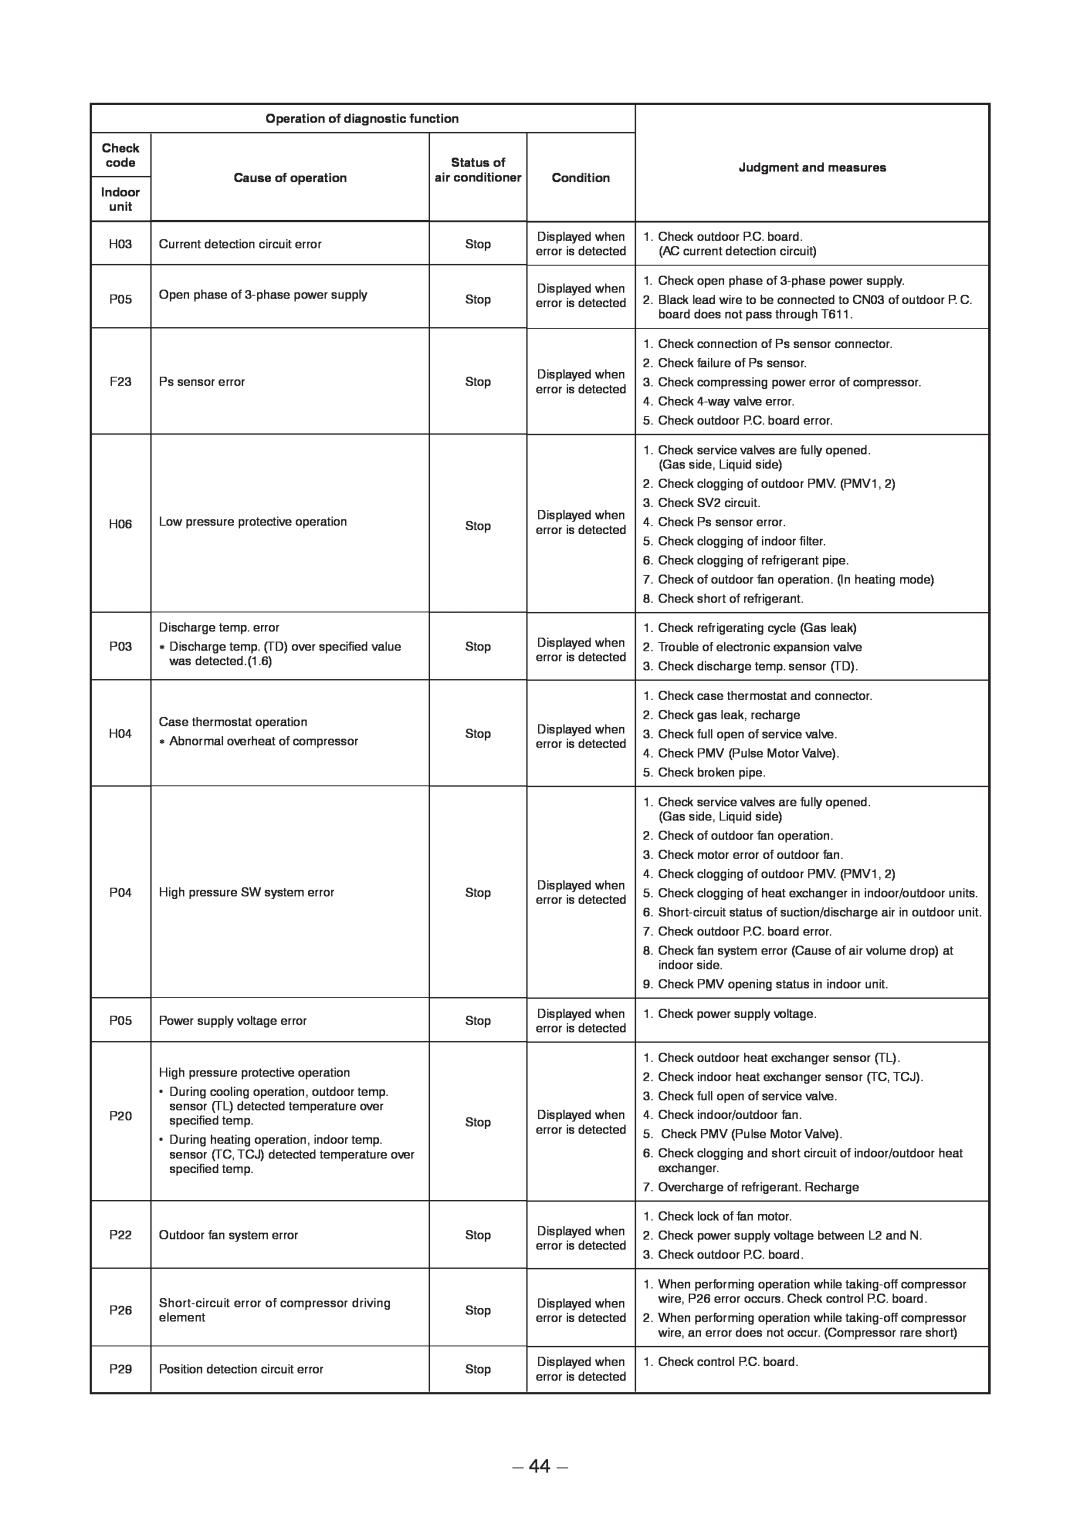 Toshiba RAV-SM1106BT-E Operation of diagnostic function, Check, Status of, Judgment and measures, Cause of operation 